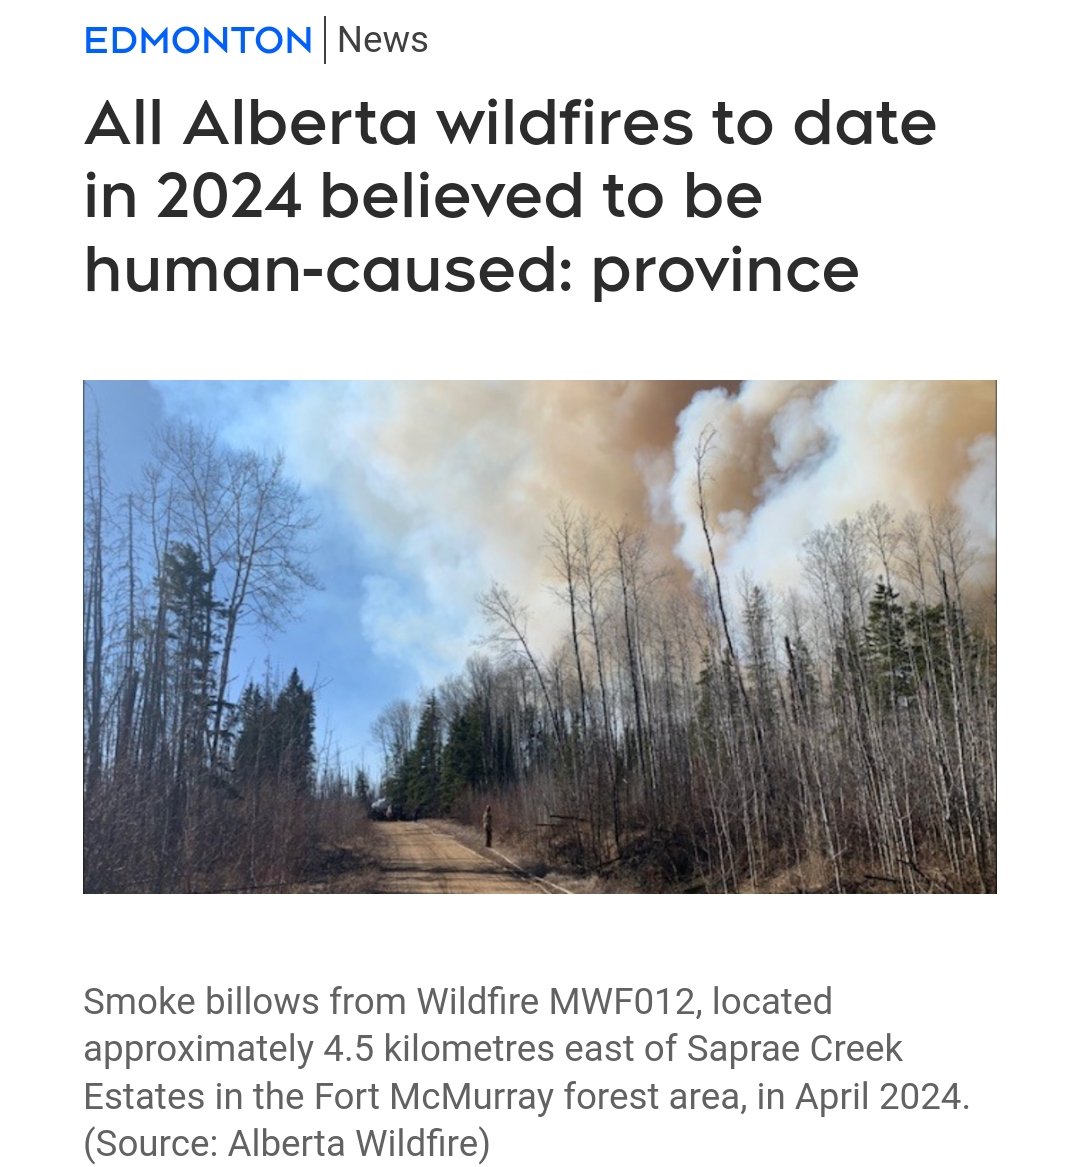 I hope the residents of #FortMcMurray are able to return to their homes soon, if they have to evacuate due to arsonis... I mean, climate change.